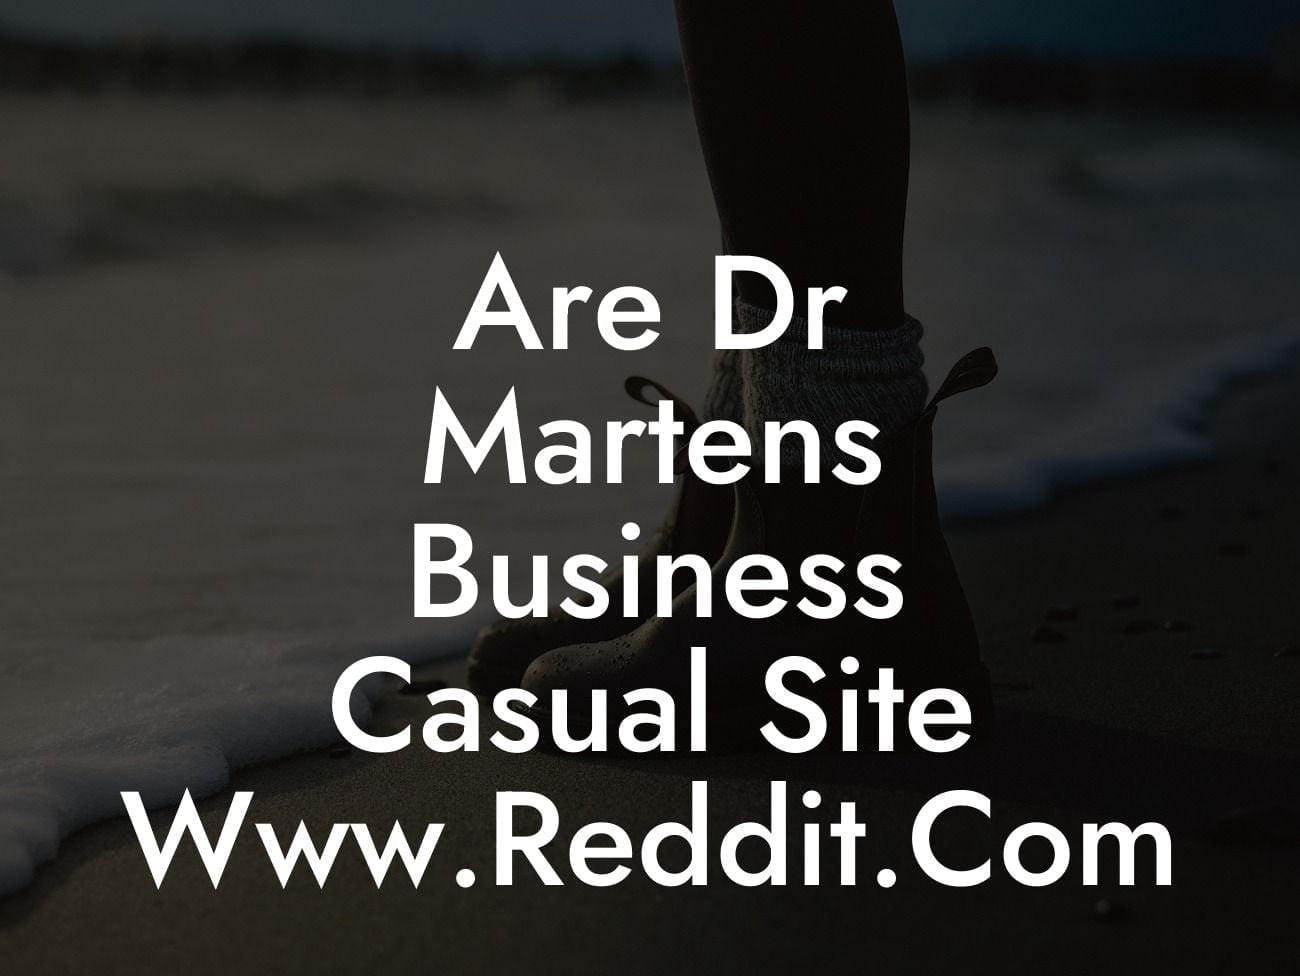 Are Dr Martens Business Casual Site Www.Reddit.Com